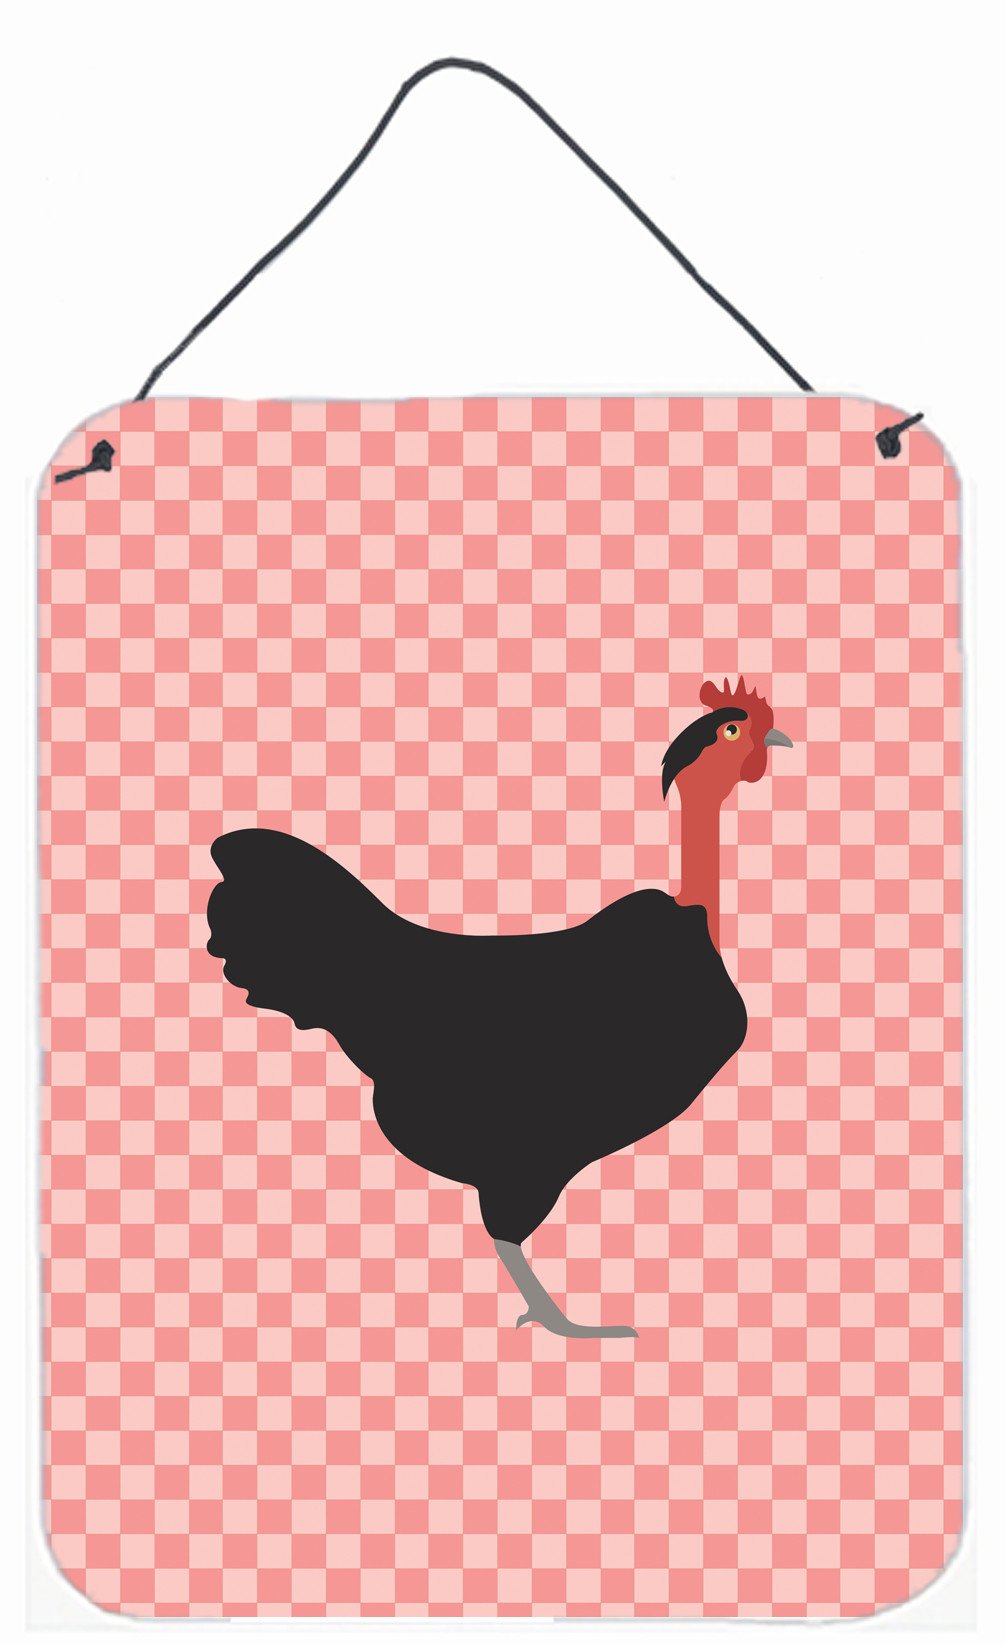 Naked Neck Chicken Pink Check Wall or Door Hanging Prints BB7839DS1216 by Caroline's Treasures